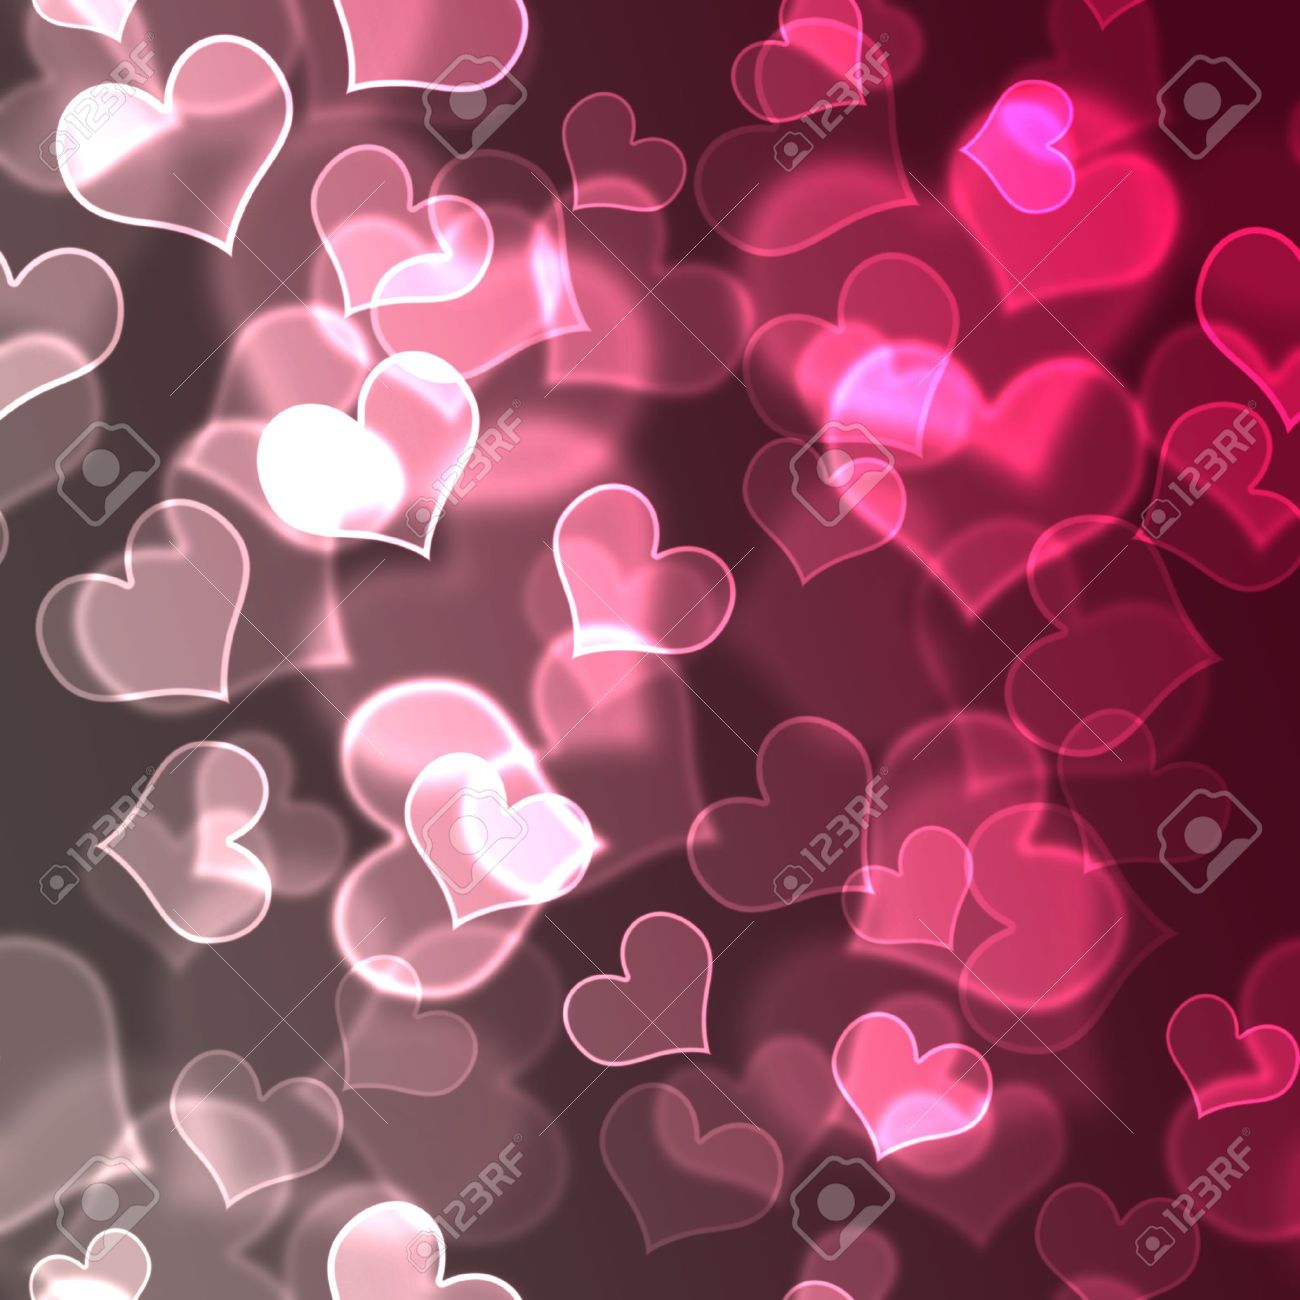 Red Hearts Background Wallpaper